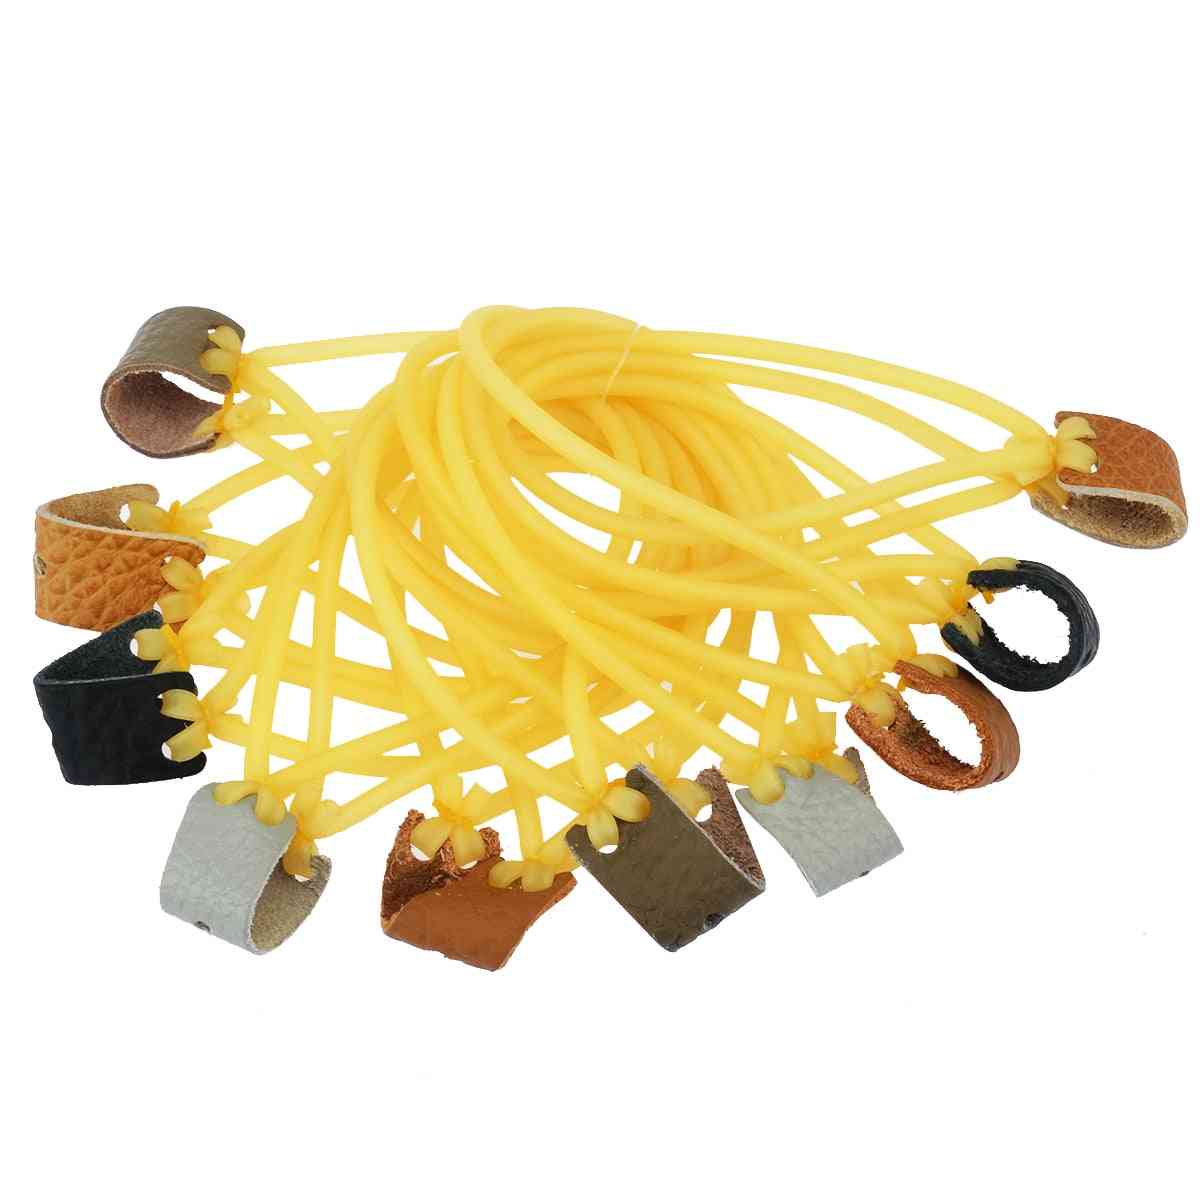 10pcs/lot Elastic Rubber Band Bungee Durable